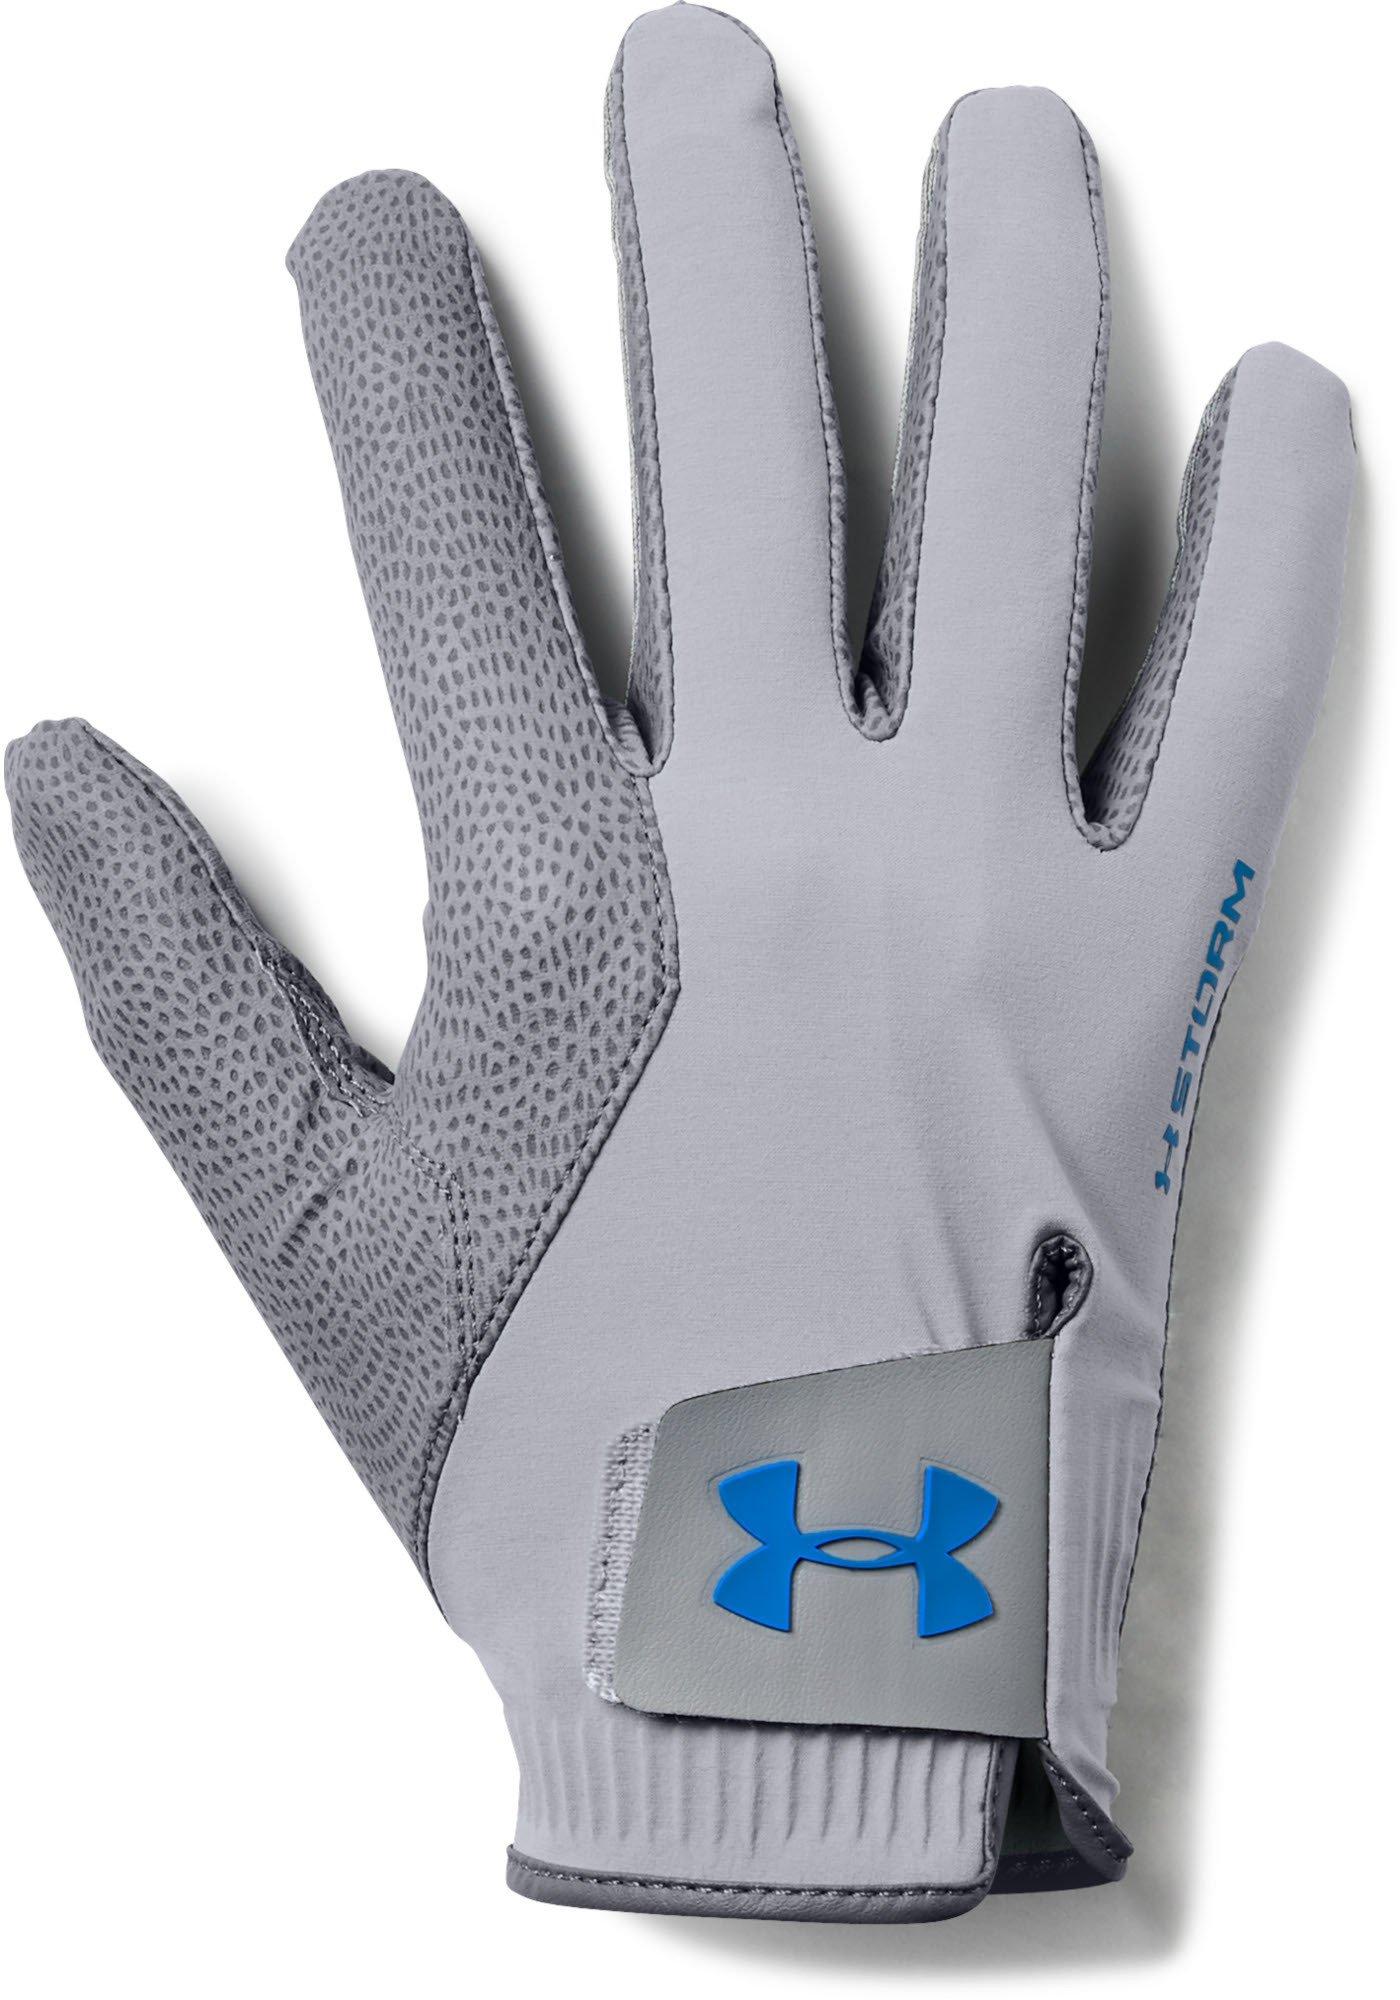 Under Armour Storm Golf Gloves-GRY S